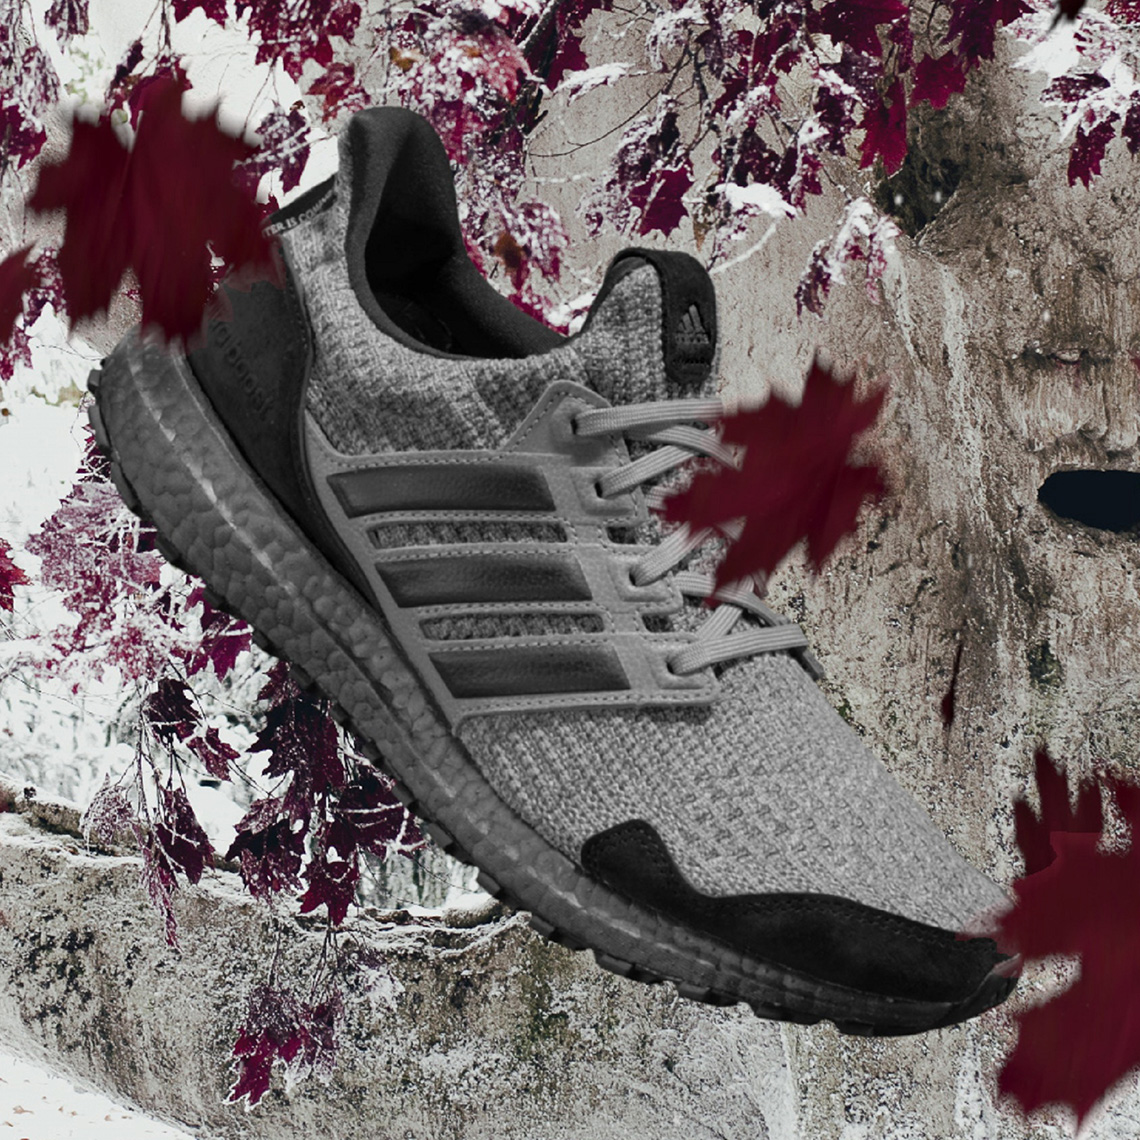 Adidas Ultraboost X Game of Thrones House Stark